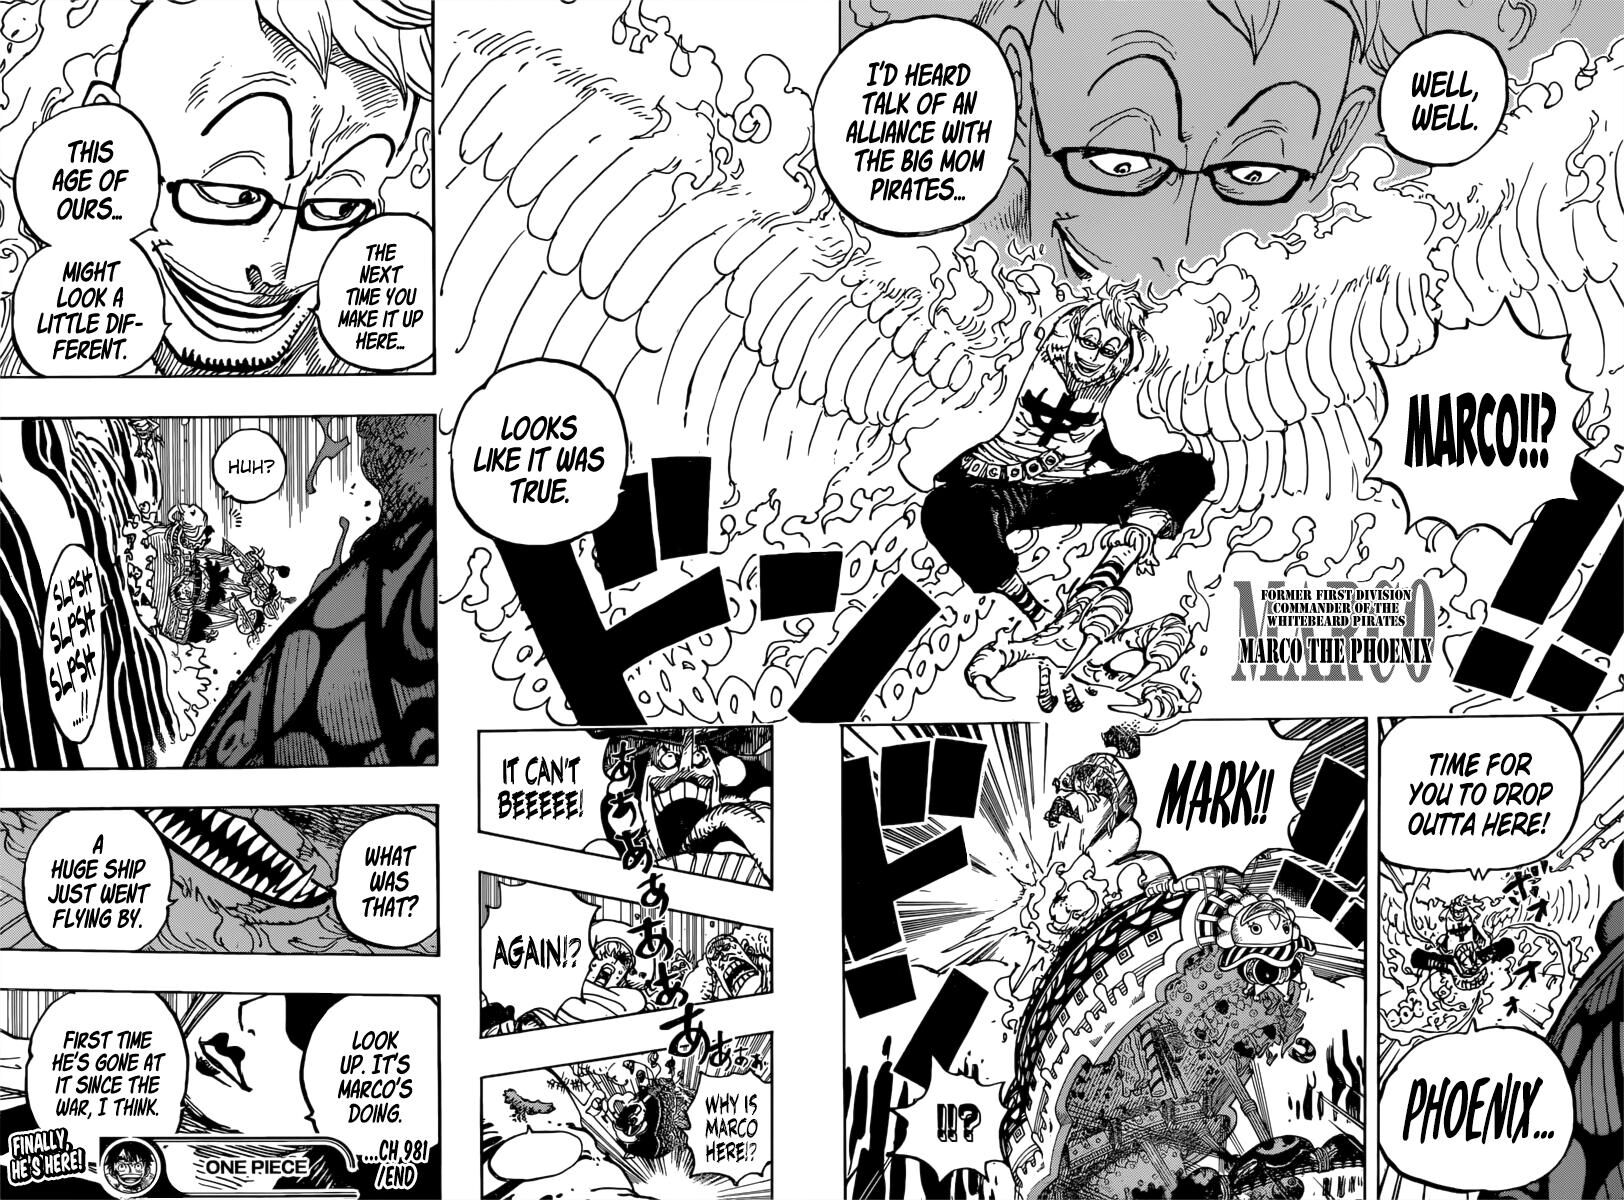 One Piece, Chapter 981 - Vol.69 Ch.981 image 16